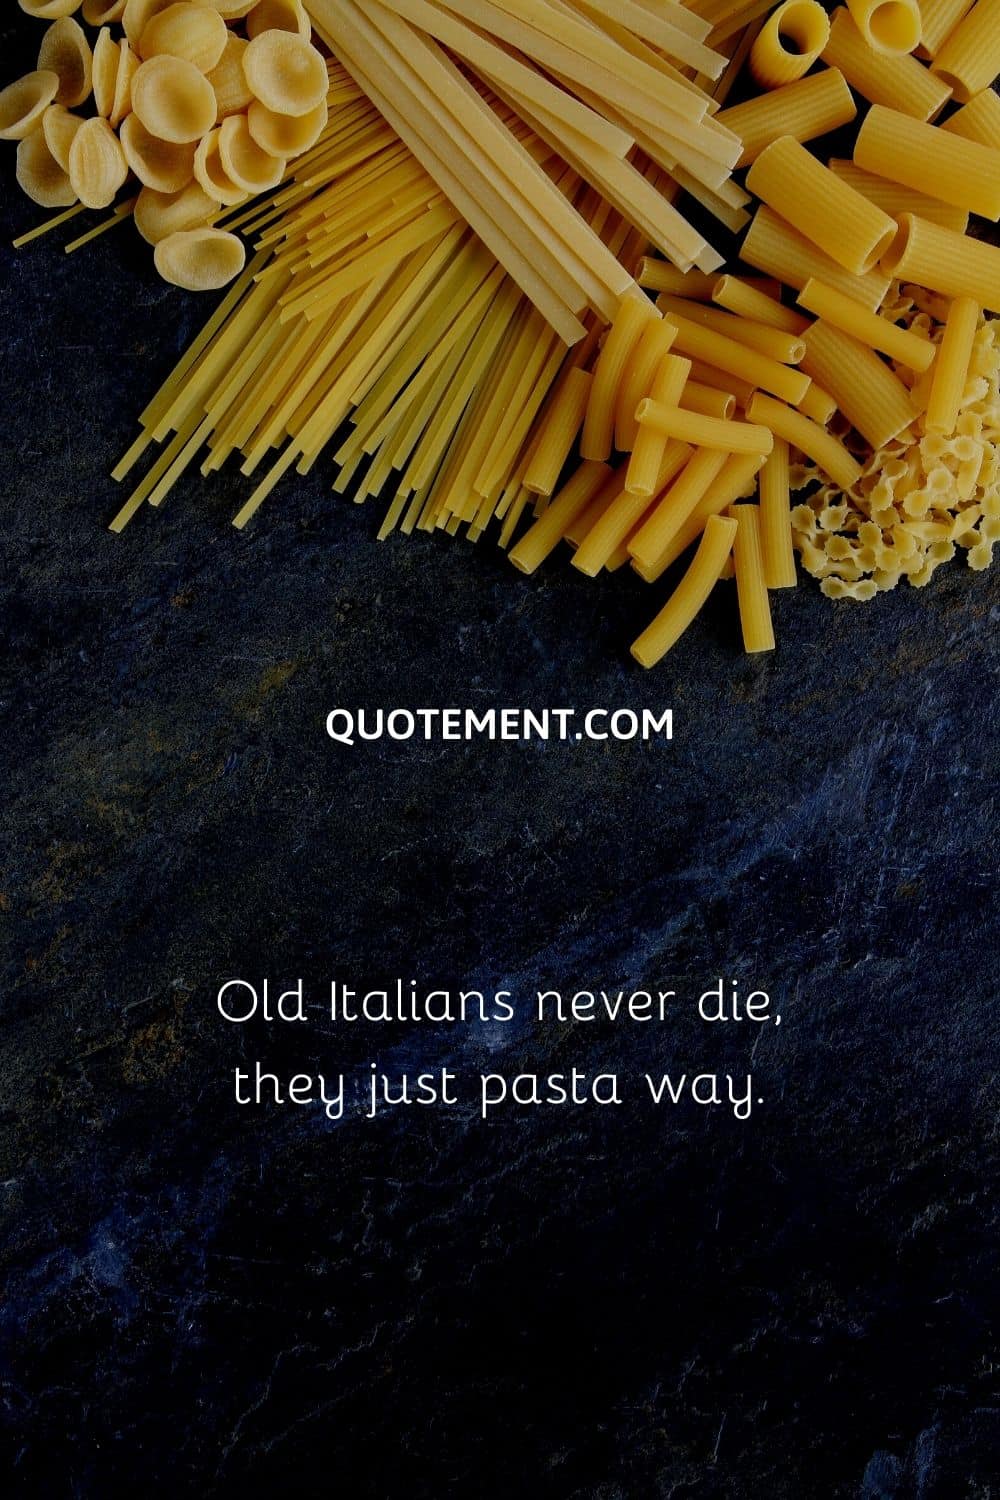 Old Italians never die, they just pasta way